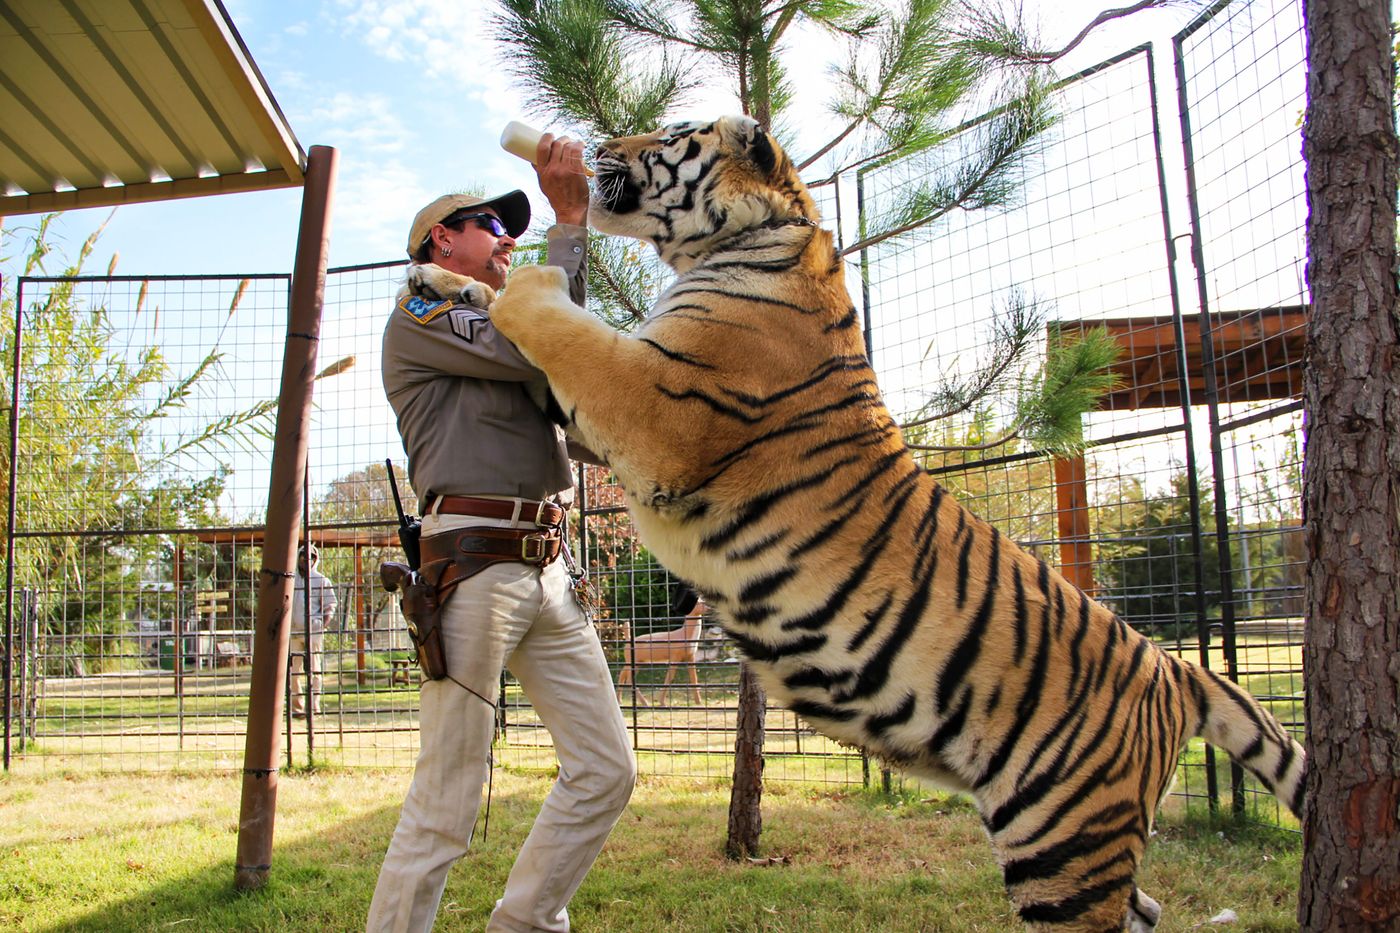 Watching Tiger King? Here’s what you should know (and how you can help)